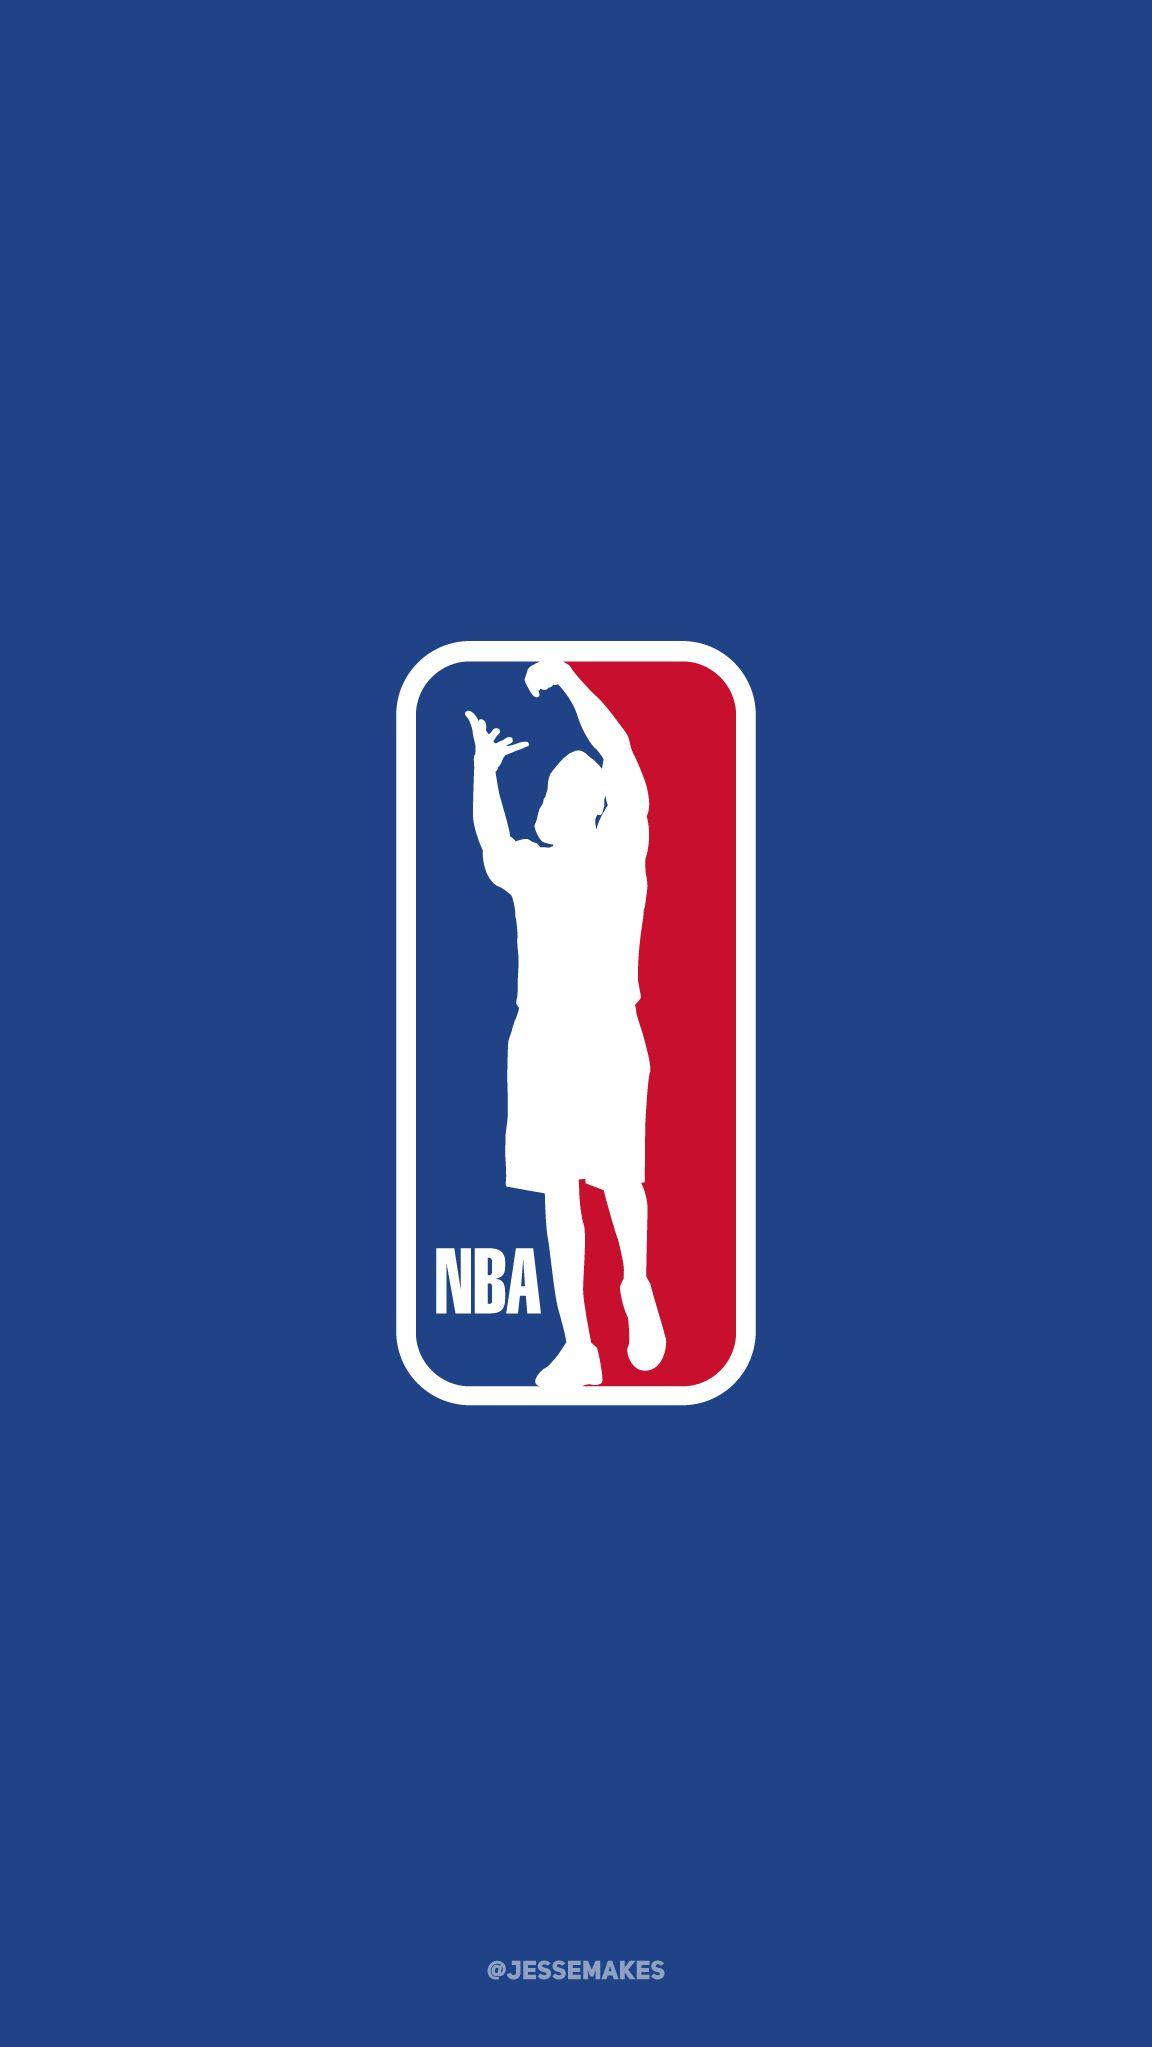 James Harden as the subject of the NBA logo. Part of my NBA